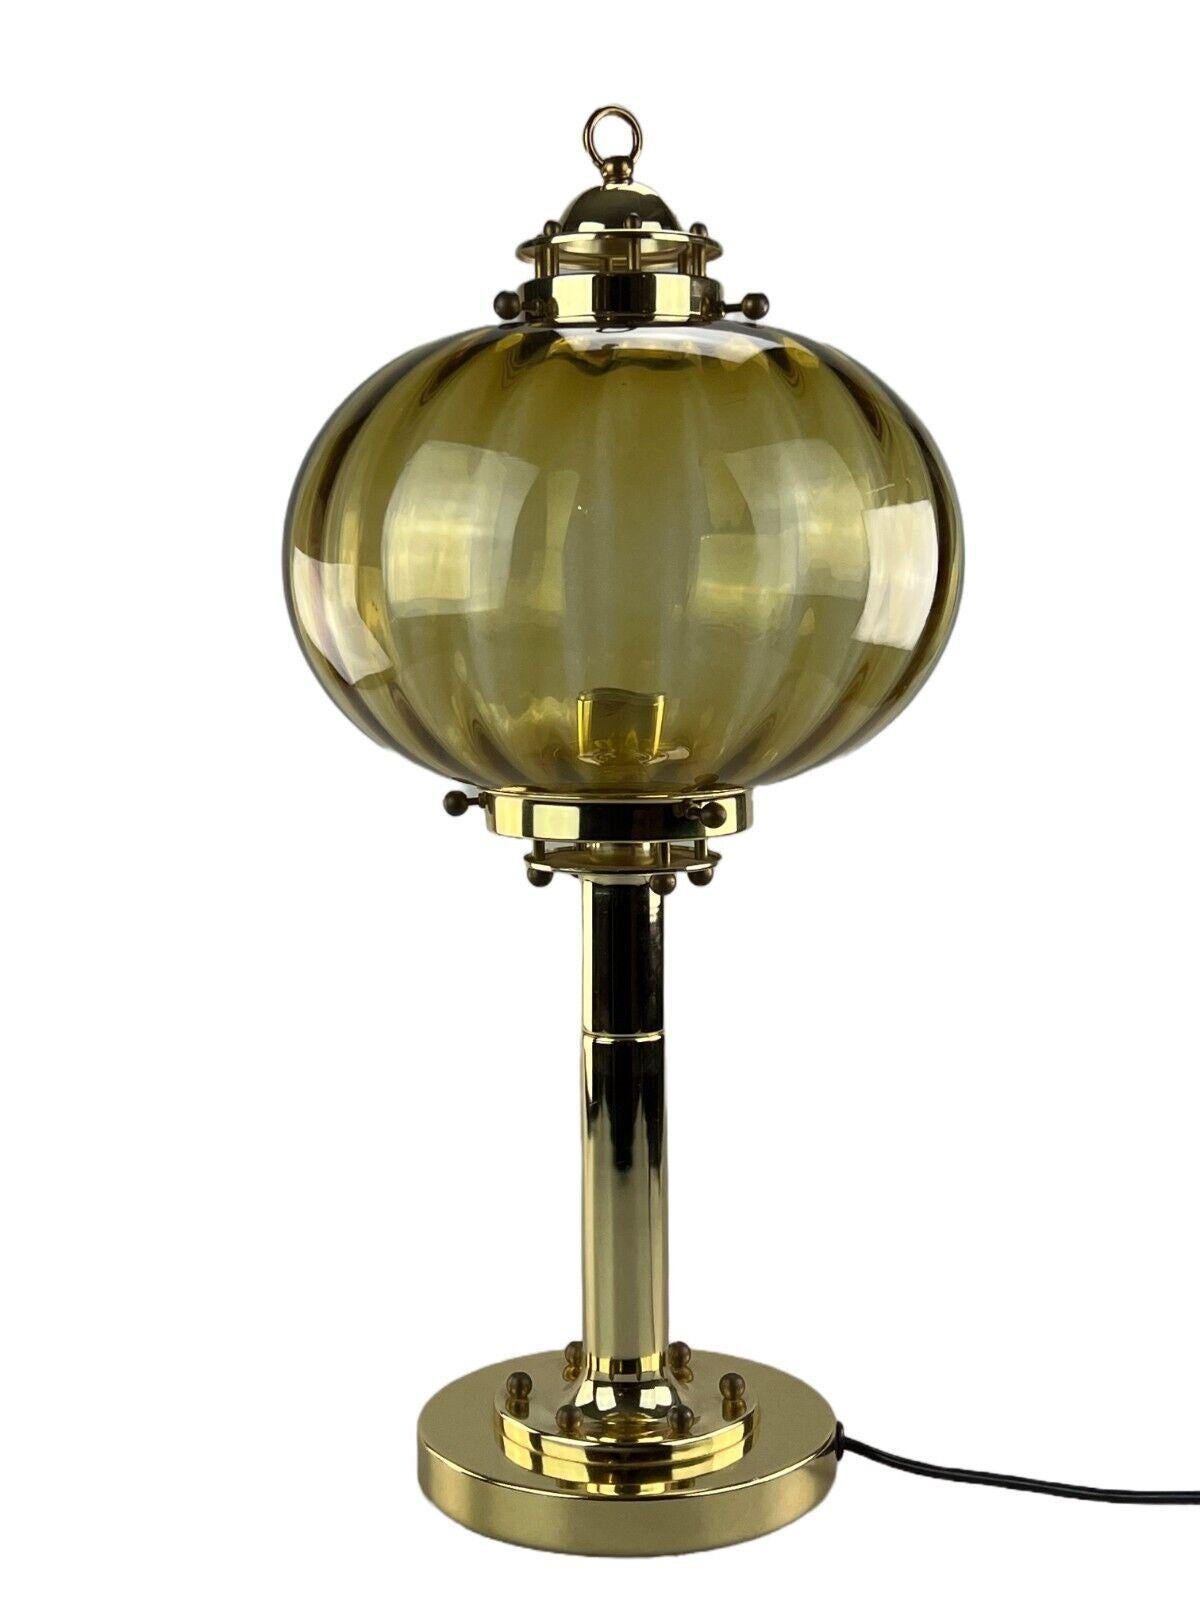 60s 70s Peill & Putzler Germany table lamp lamp light glass design

Object: table lamp

Manufacturer: Peill & Putzler

Condition: good

Age: around 1960-1970

Dimensions:

Diameter = 30cm
Height = 60cm

Other notes:

The pictures serve as part of